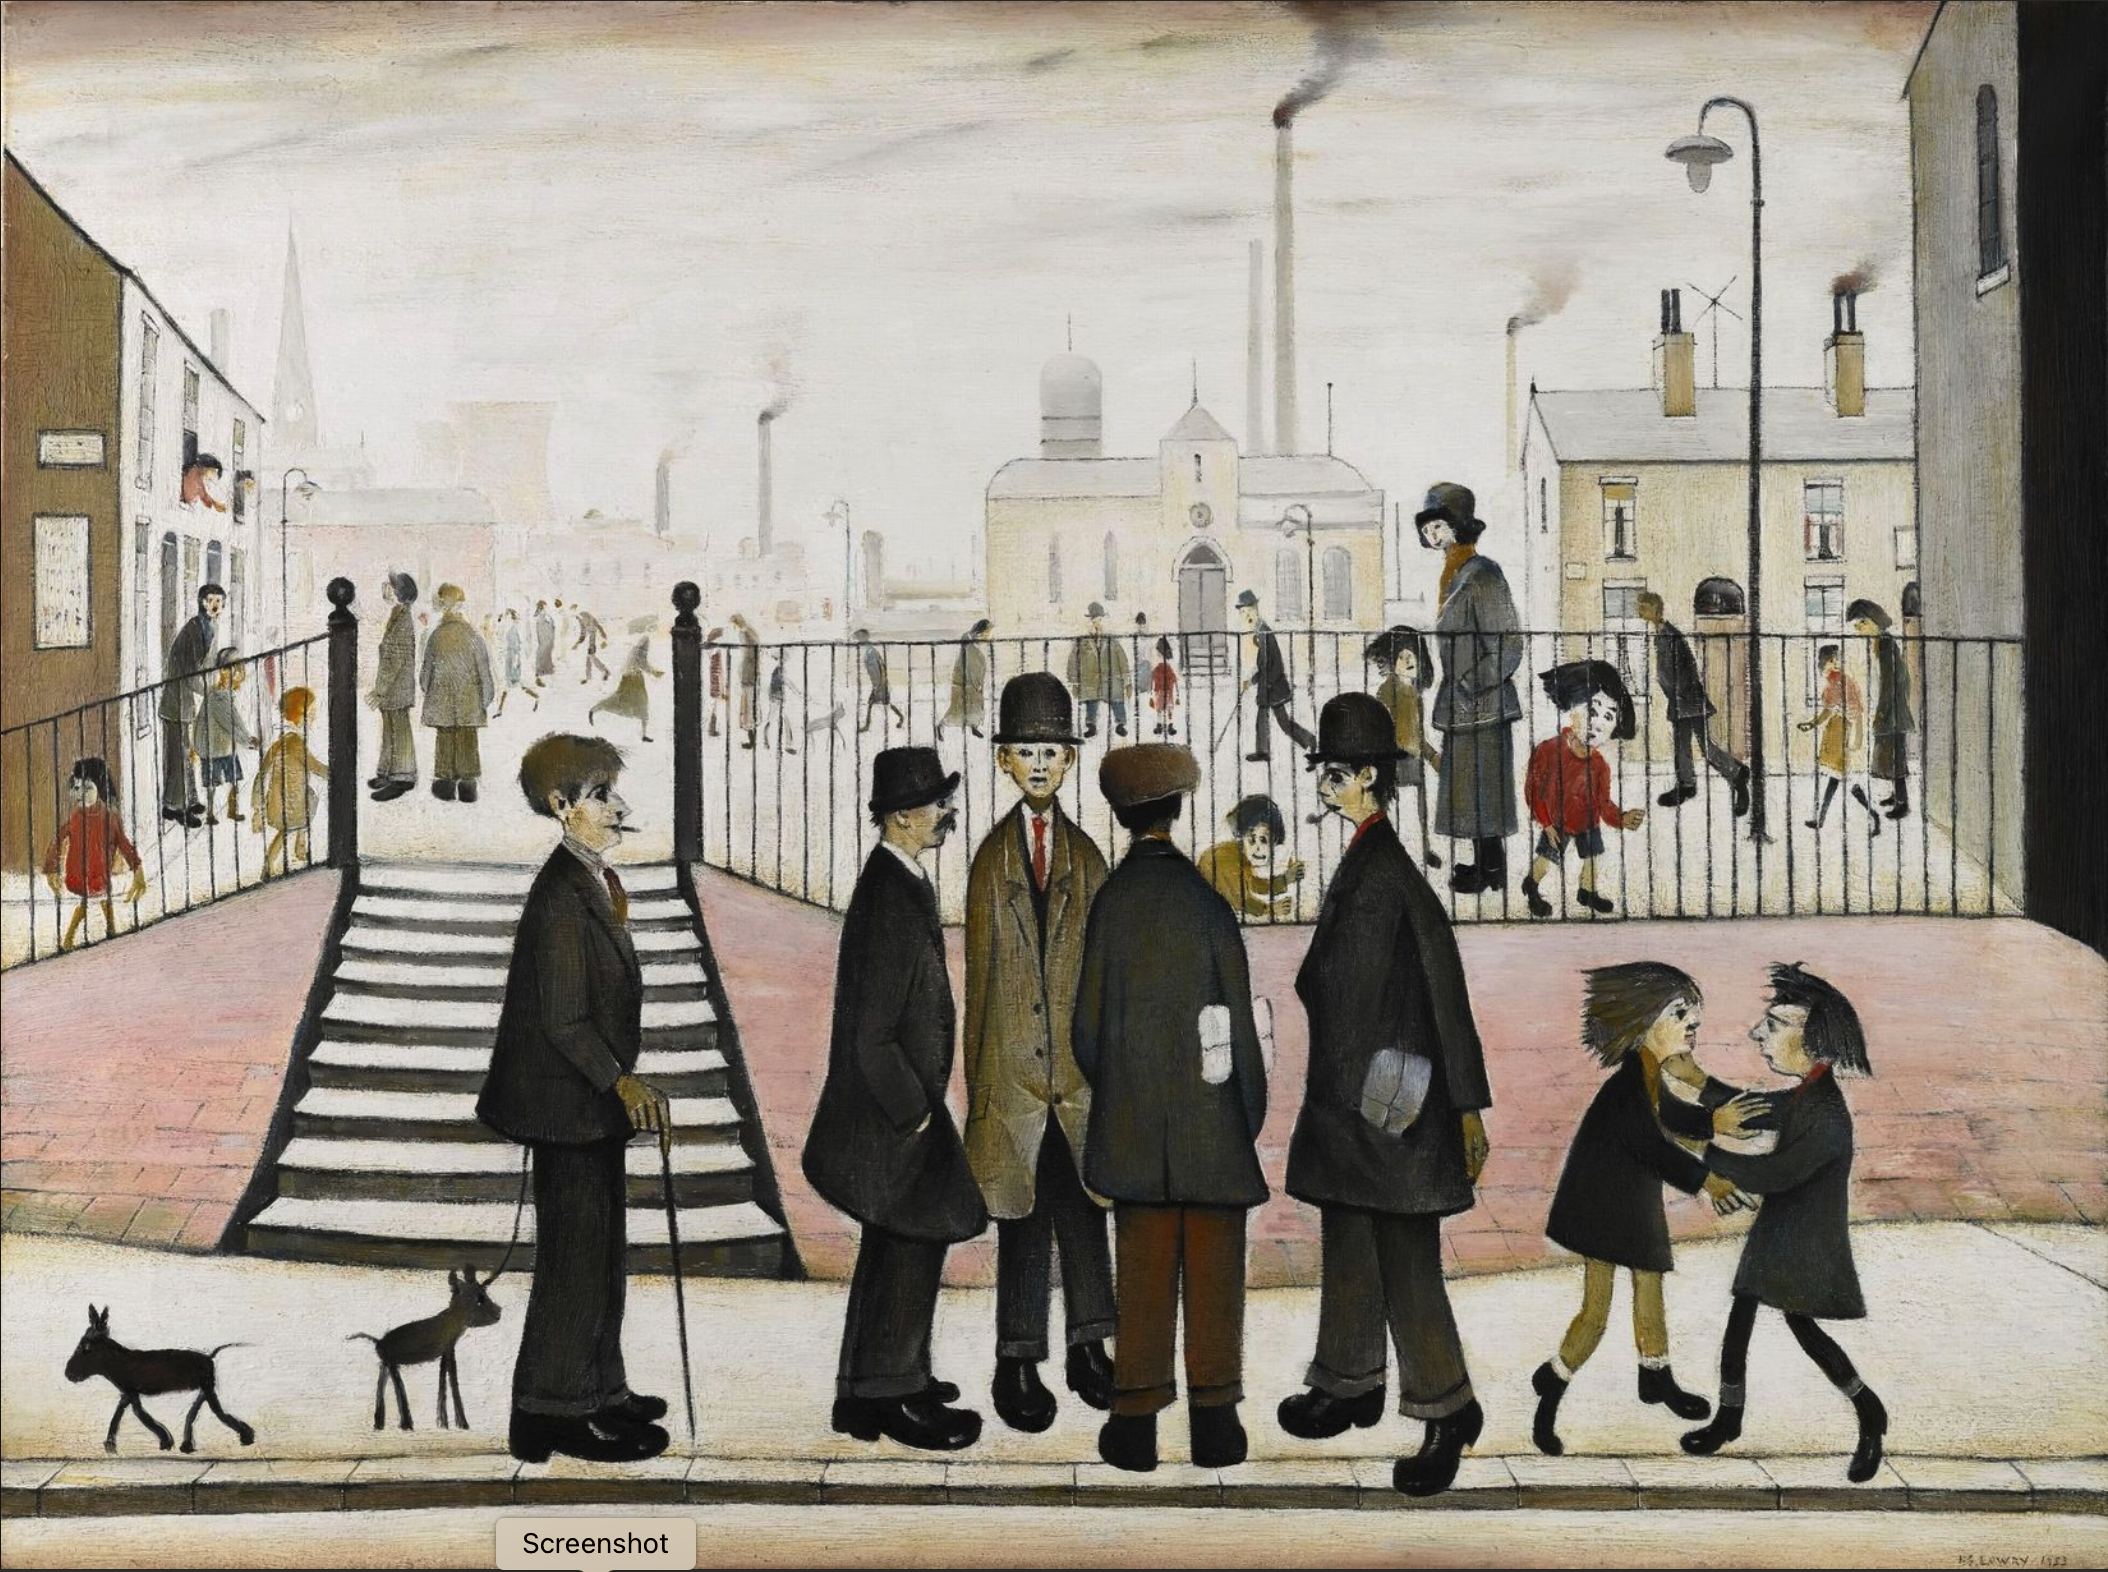 The Town Square (1953) by Laurence Stephen Lowry (1887 - 1976), English artist.